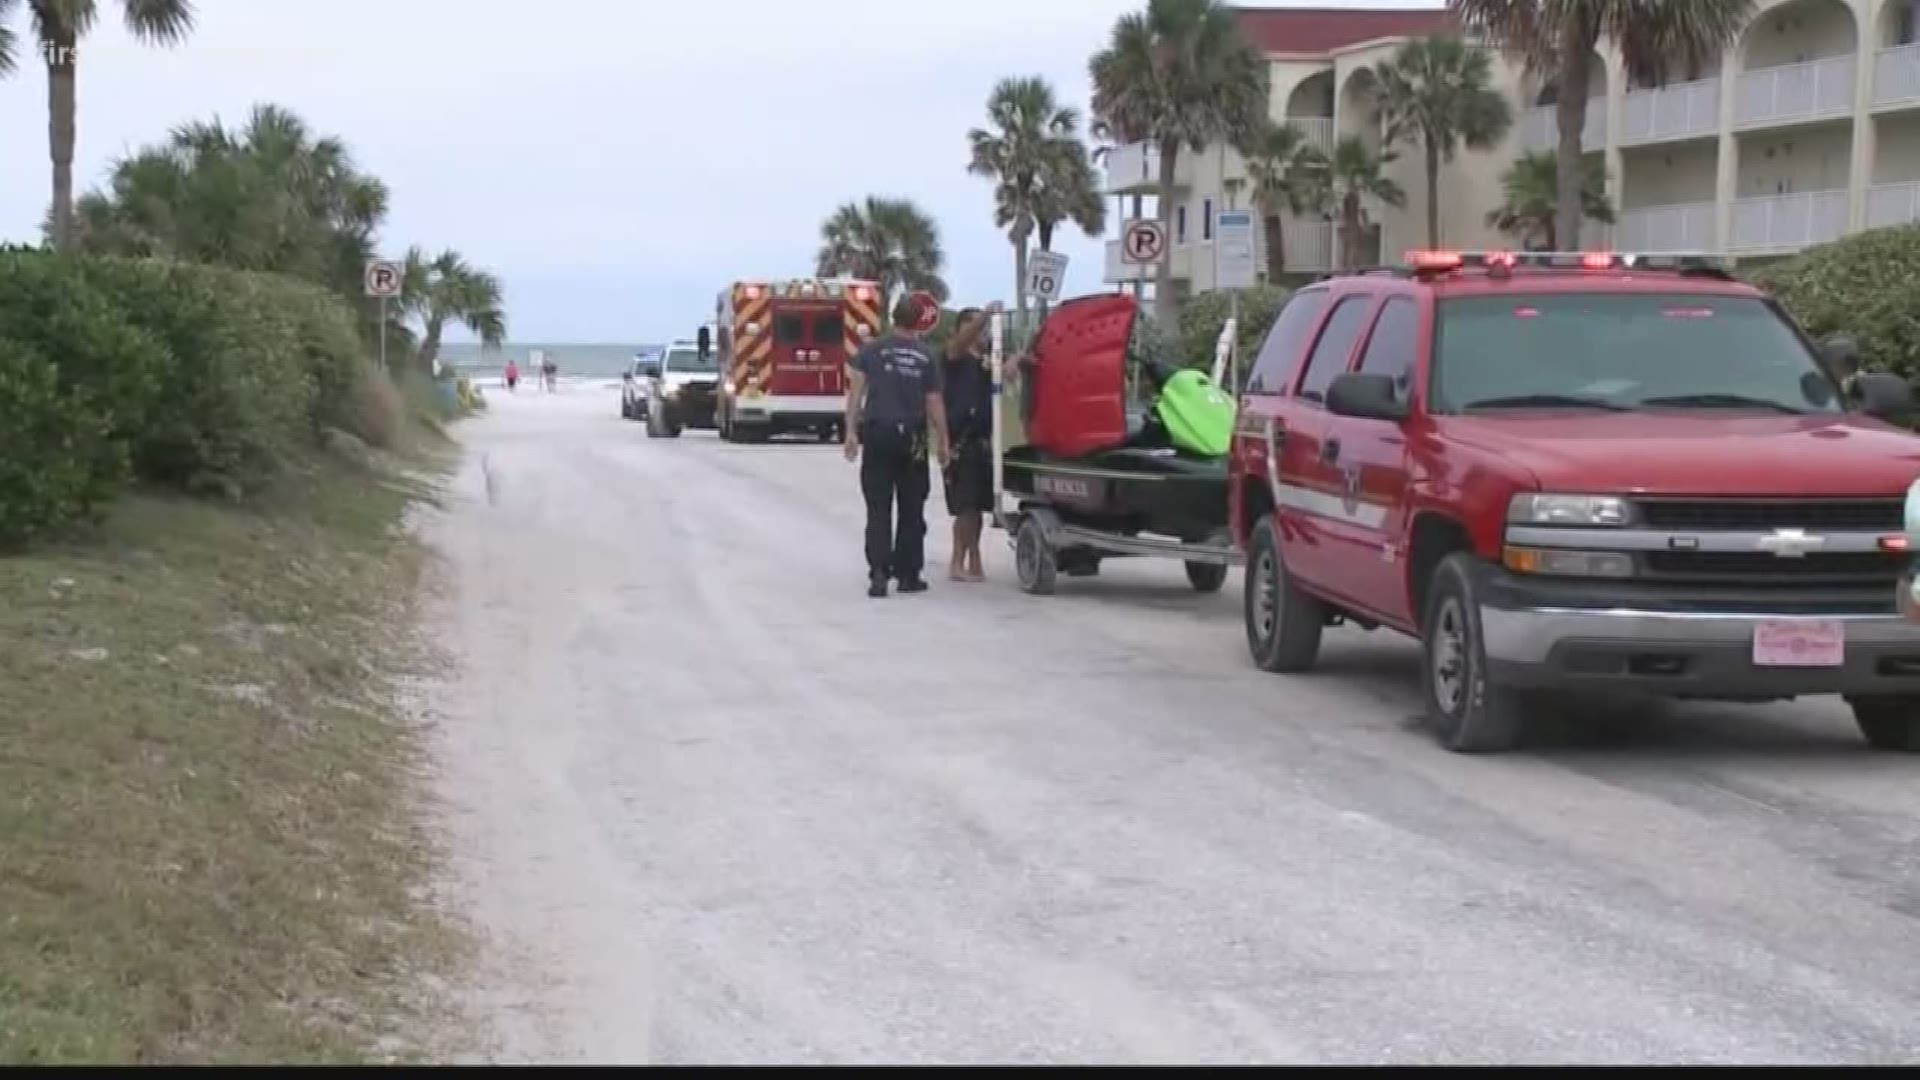 FCN's Lana Harris has the latest on an 18-year-old man who was rushed to an area hospital after a water rescue at St. Augustine Beach.